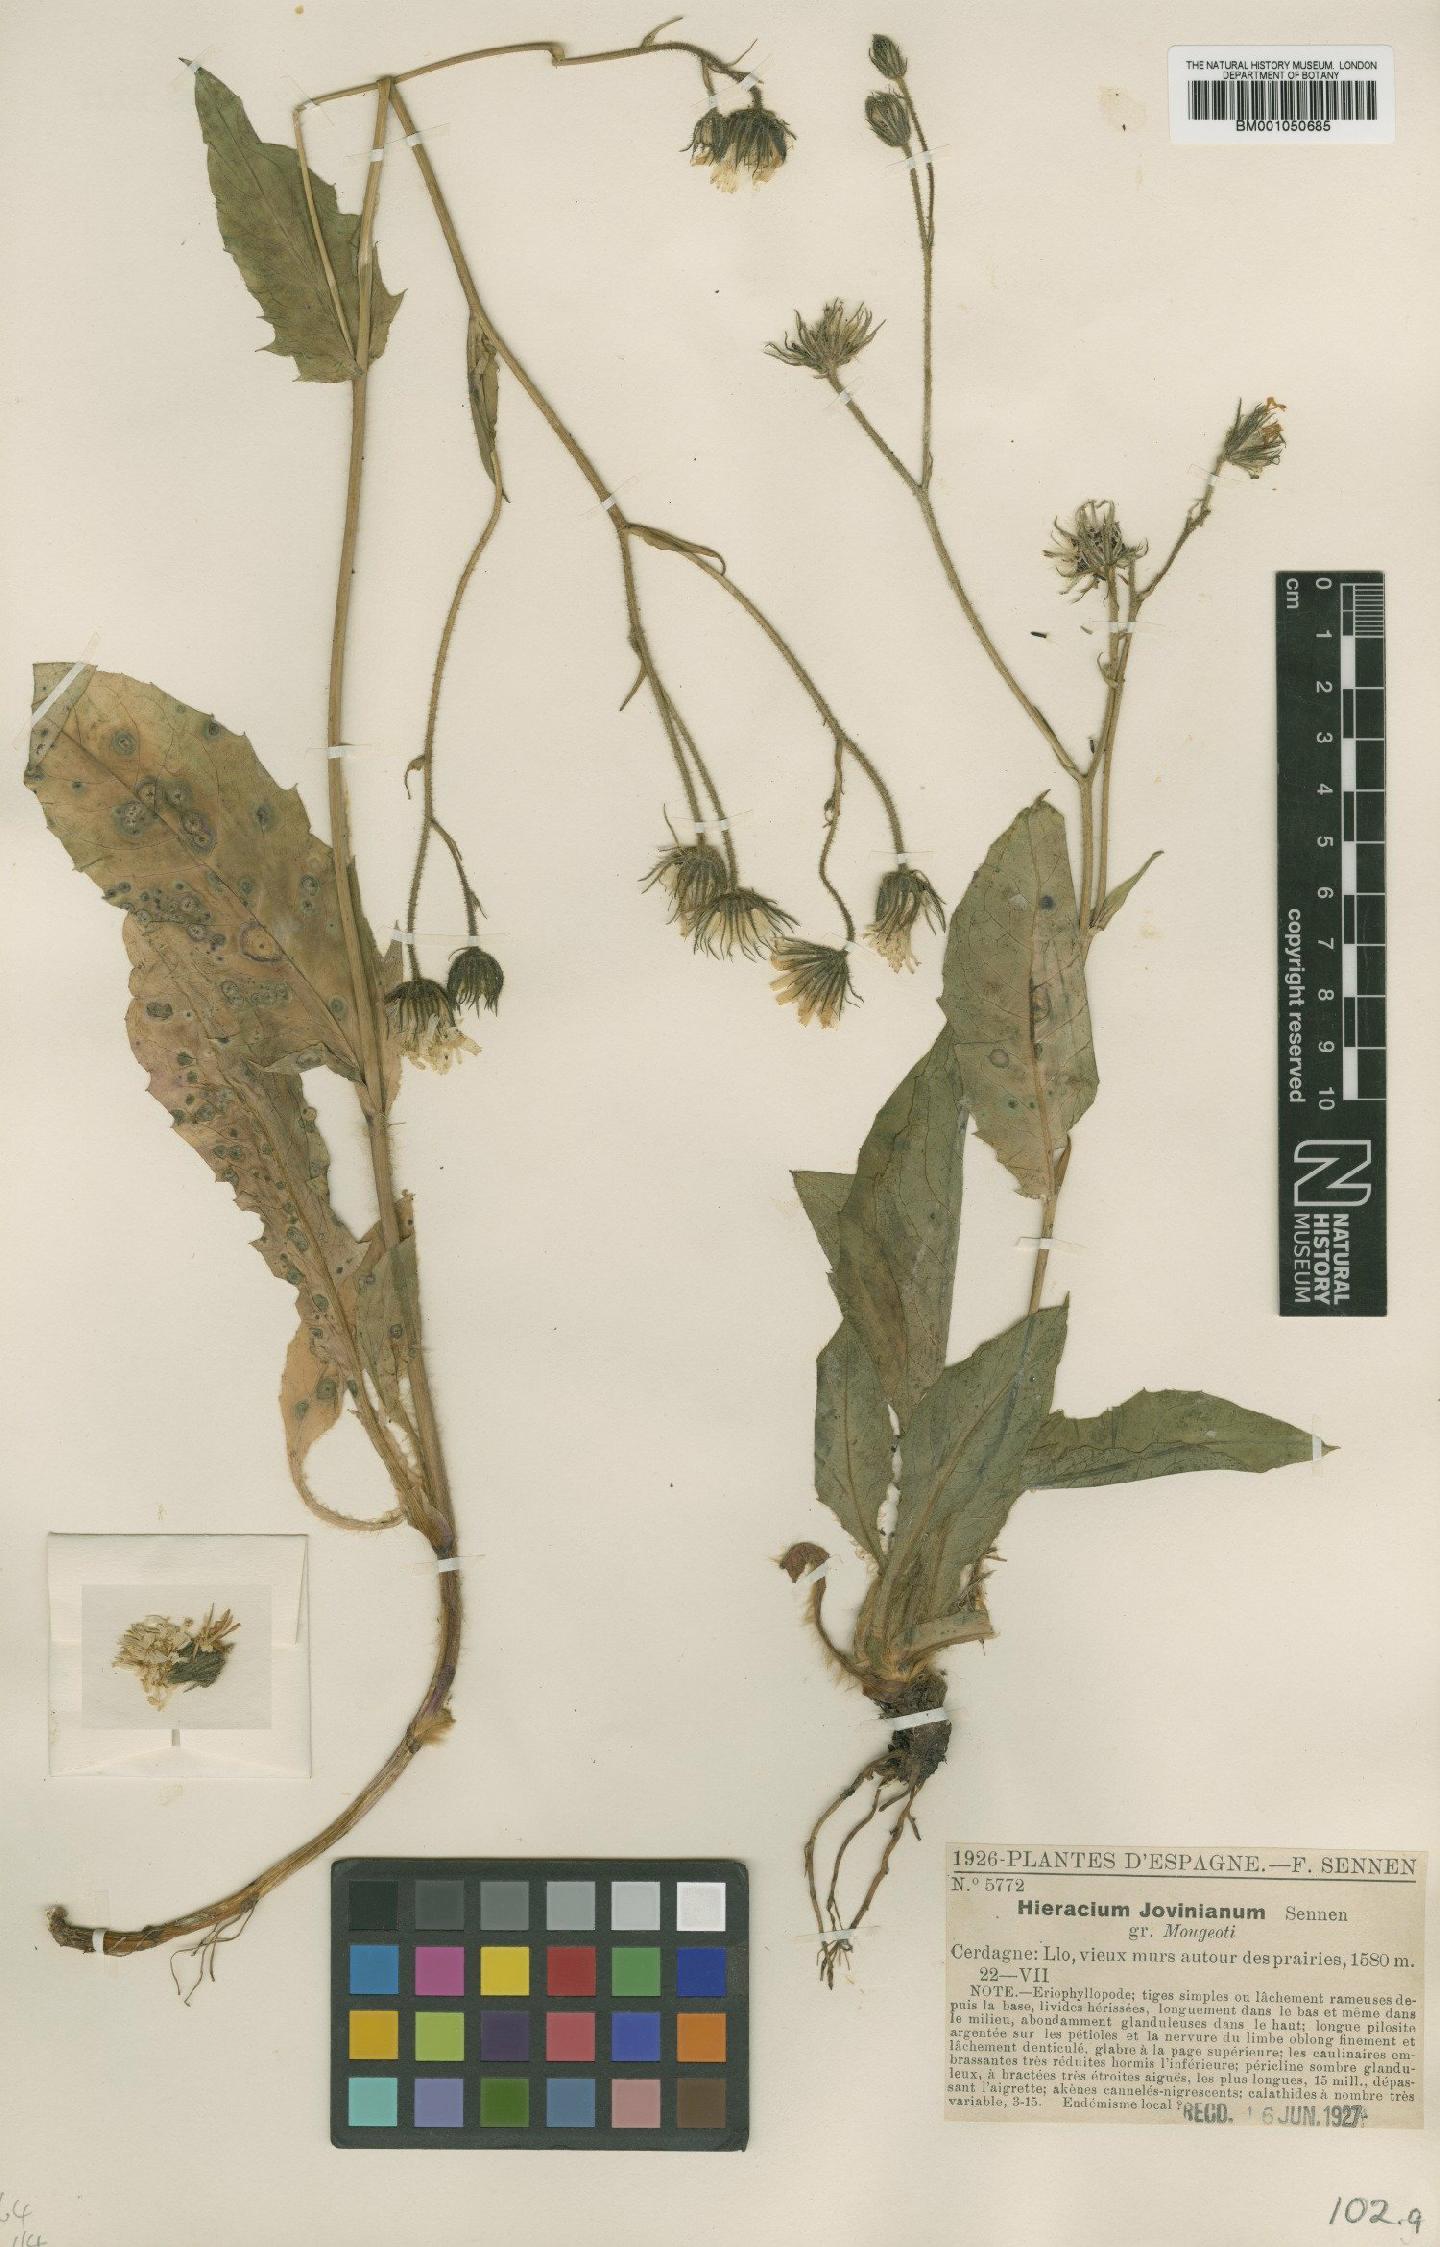 To NHMUK collection (Hieracium mougeotii Froel.; TYPE; NHMUK:ecatalogue:2398062)